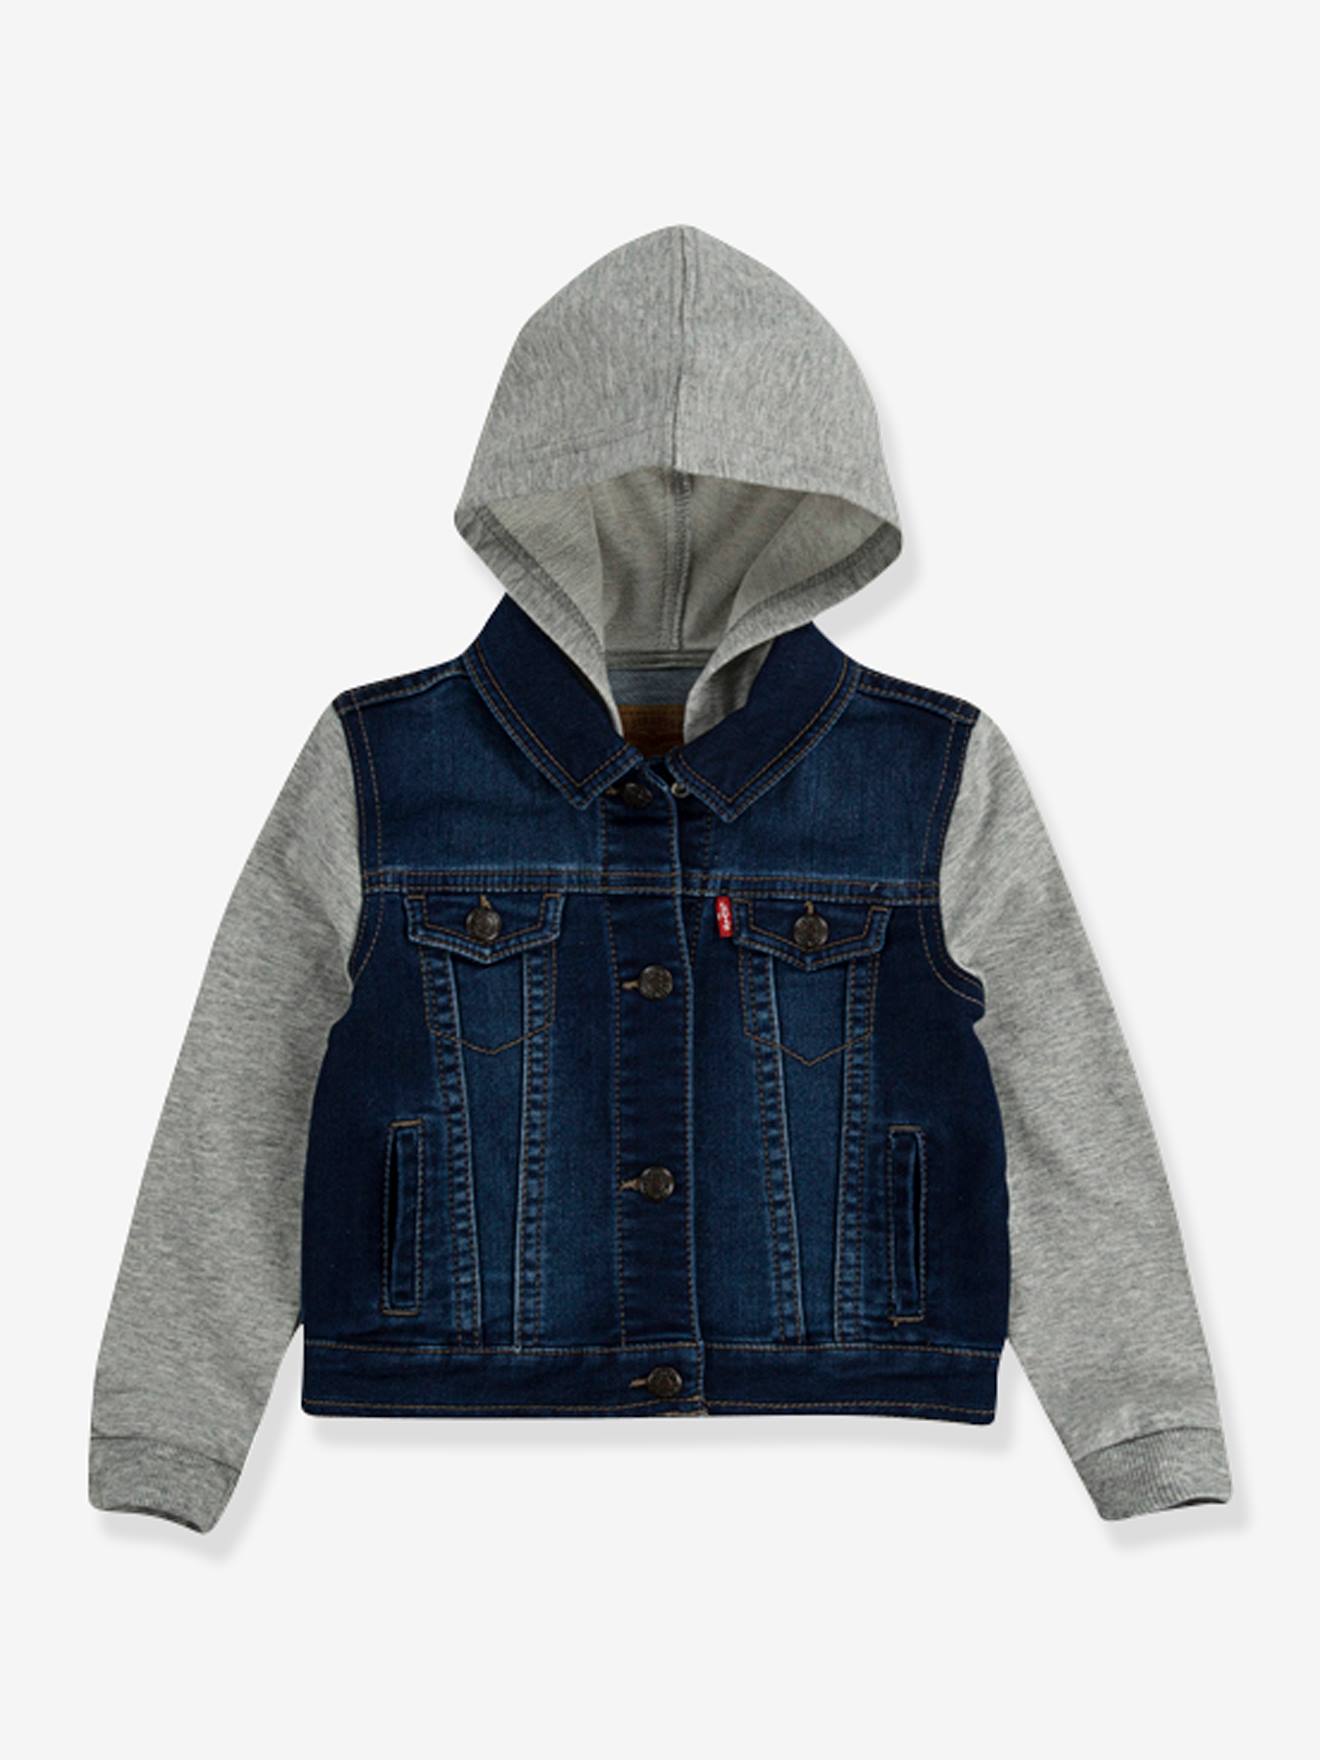 Dual Fabric Jacket with Hood by Levi’s(r) denim blue